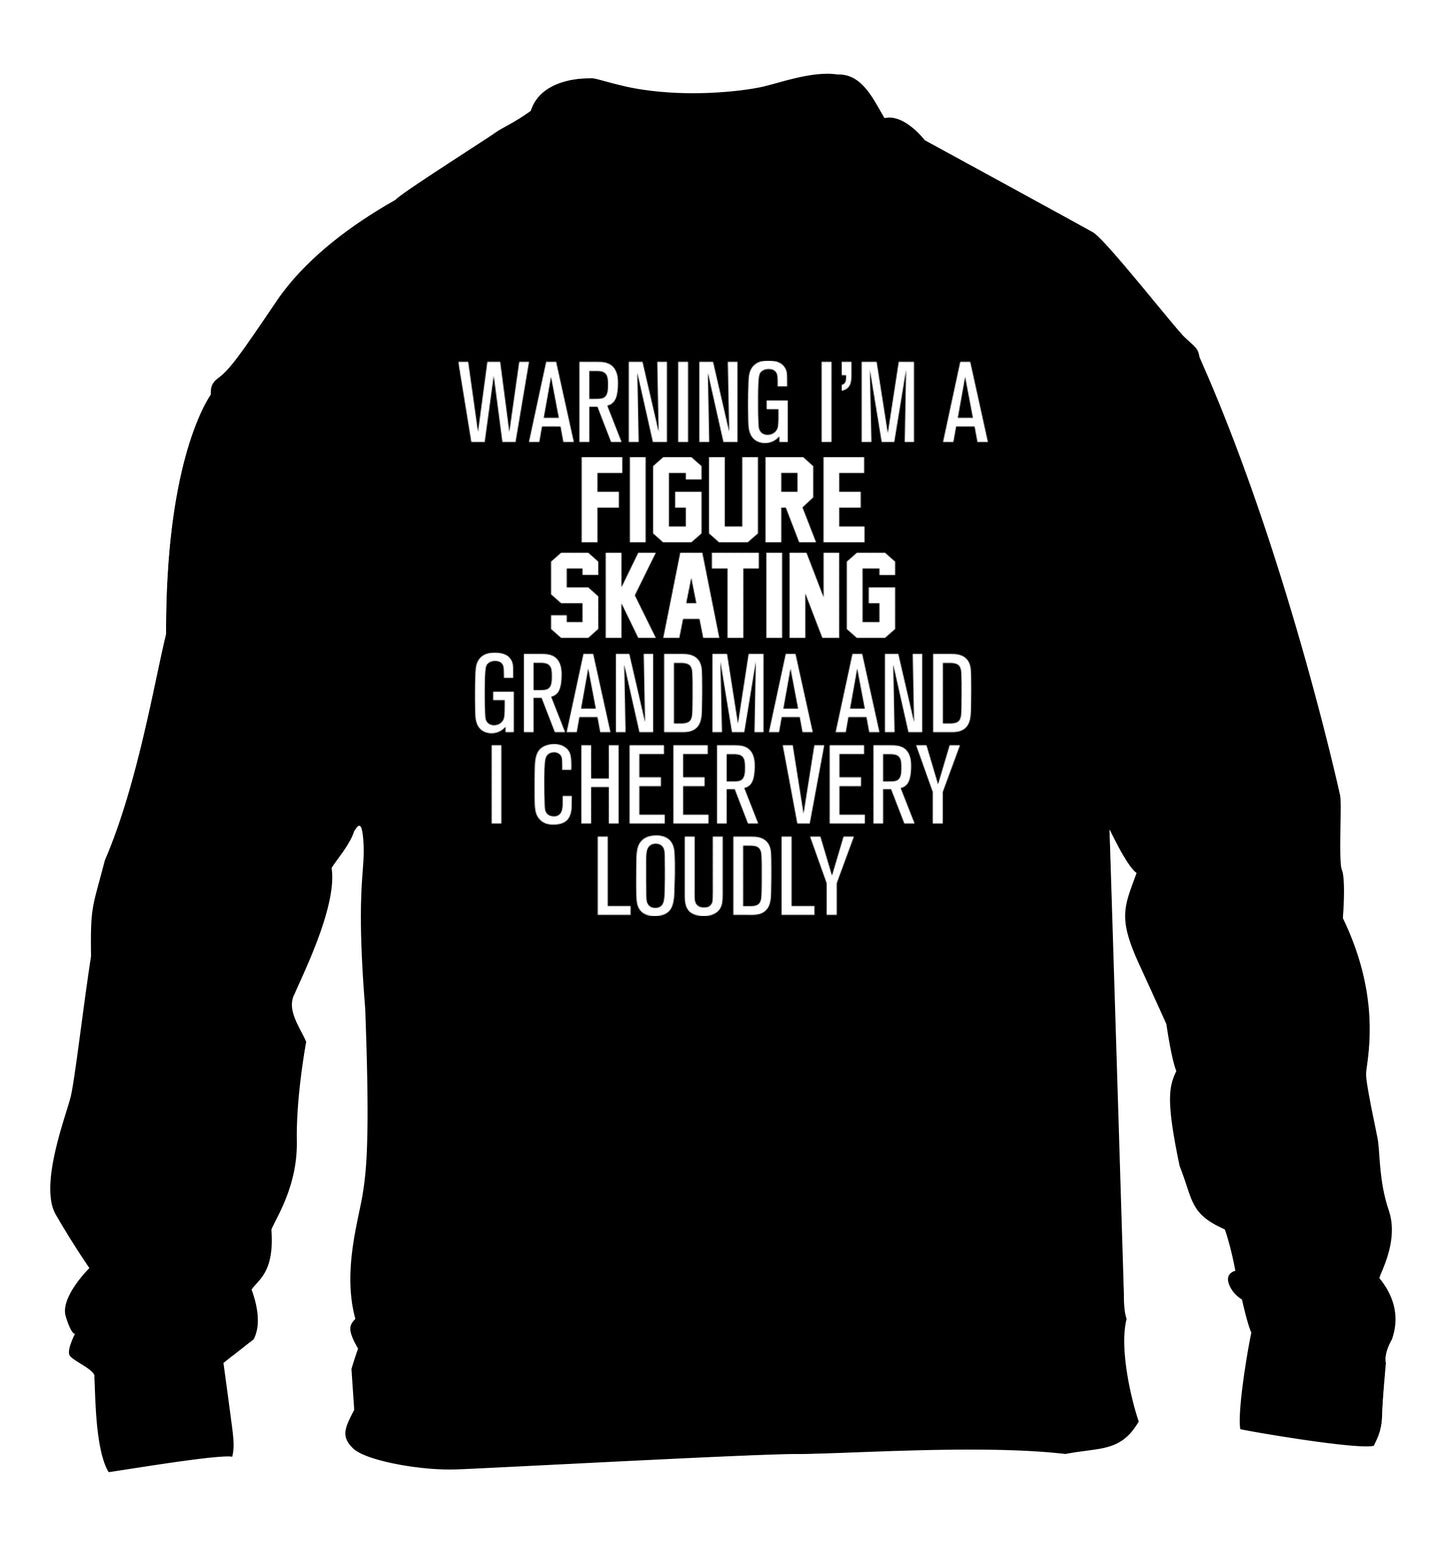 Warning I'm a figure skating grandma and I cheer very loudly children's black sweater 12-14 Years